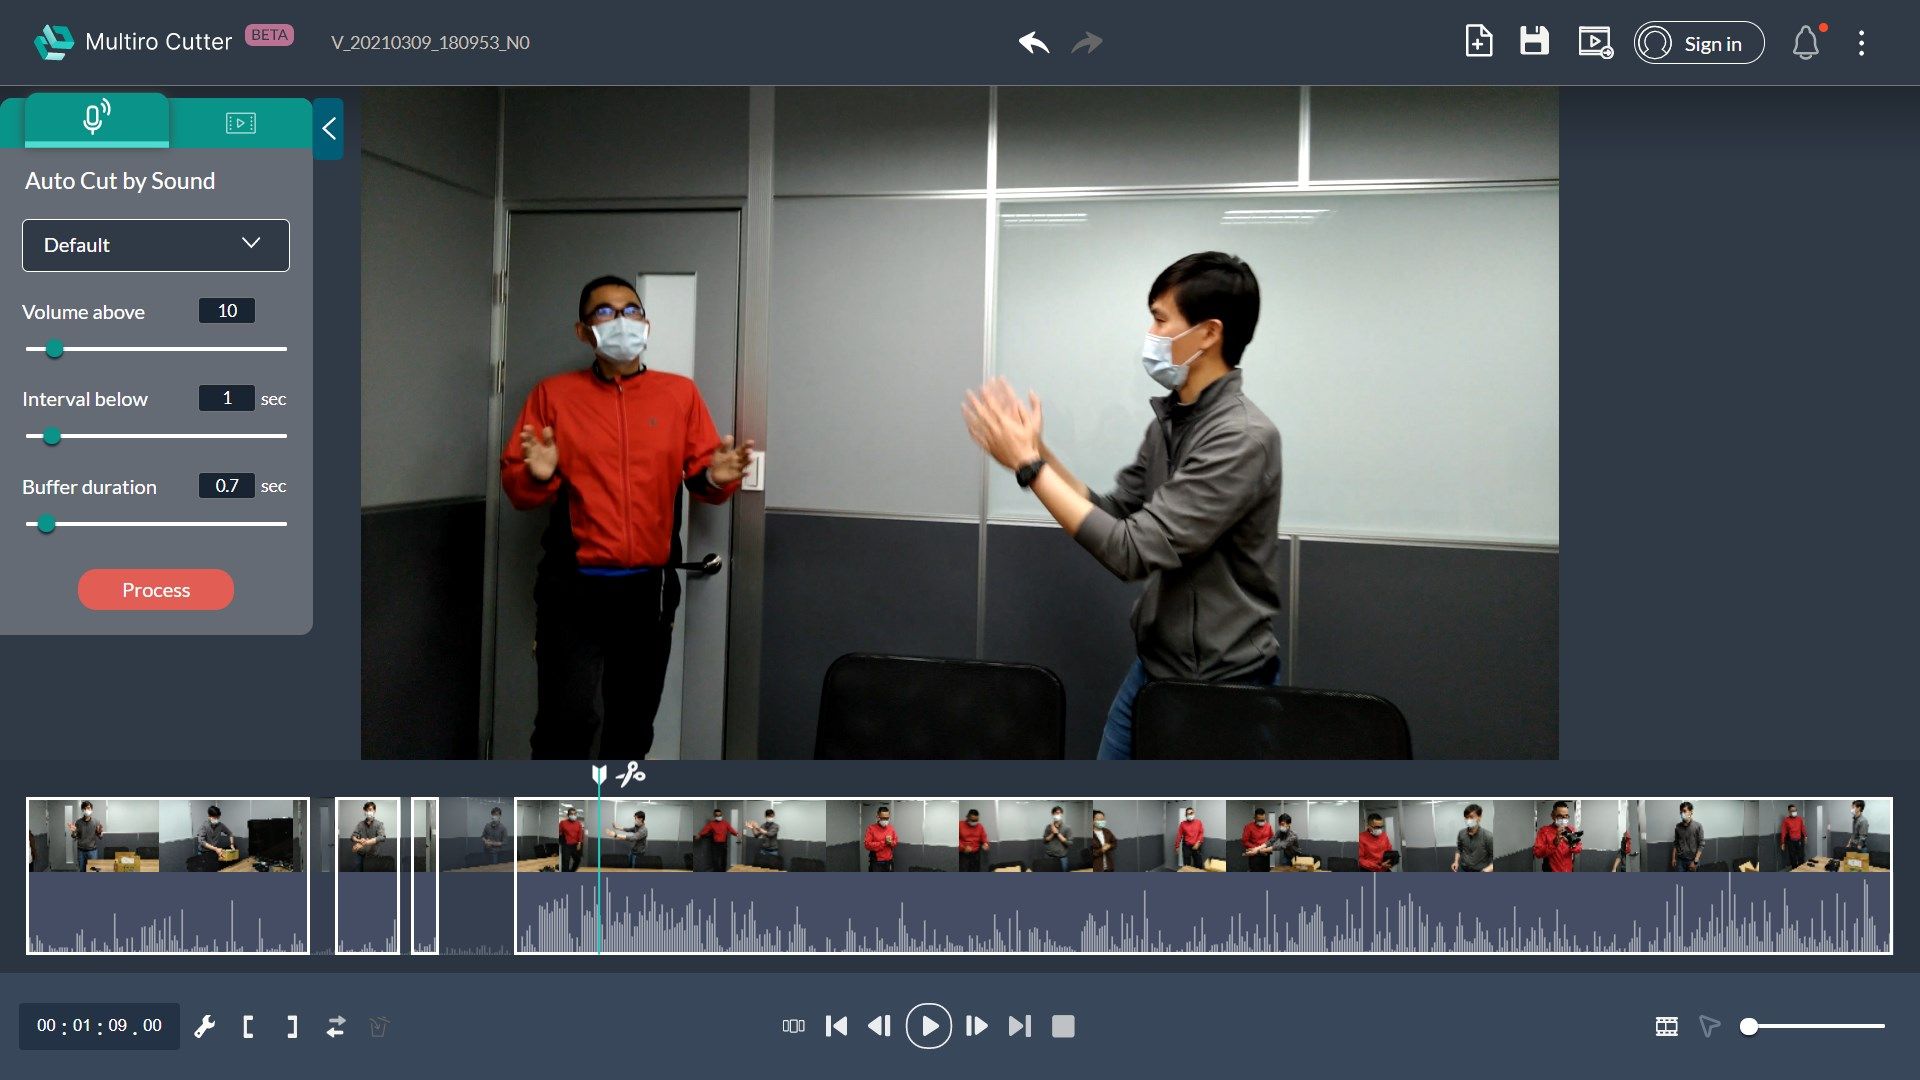 Automatically mark the scenes with noticeable sounds in a meeting or event.